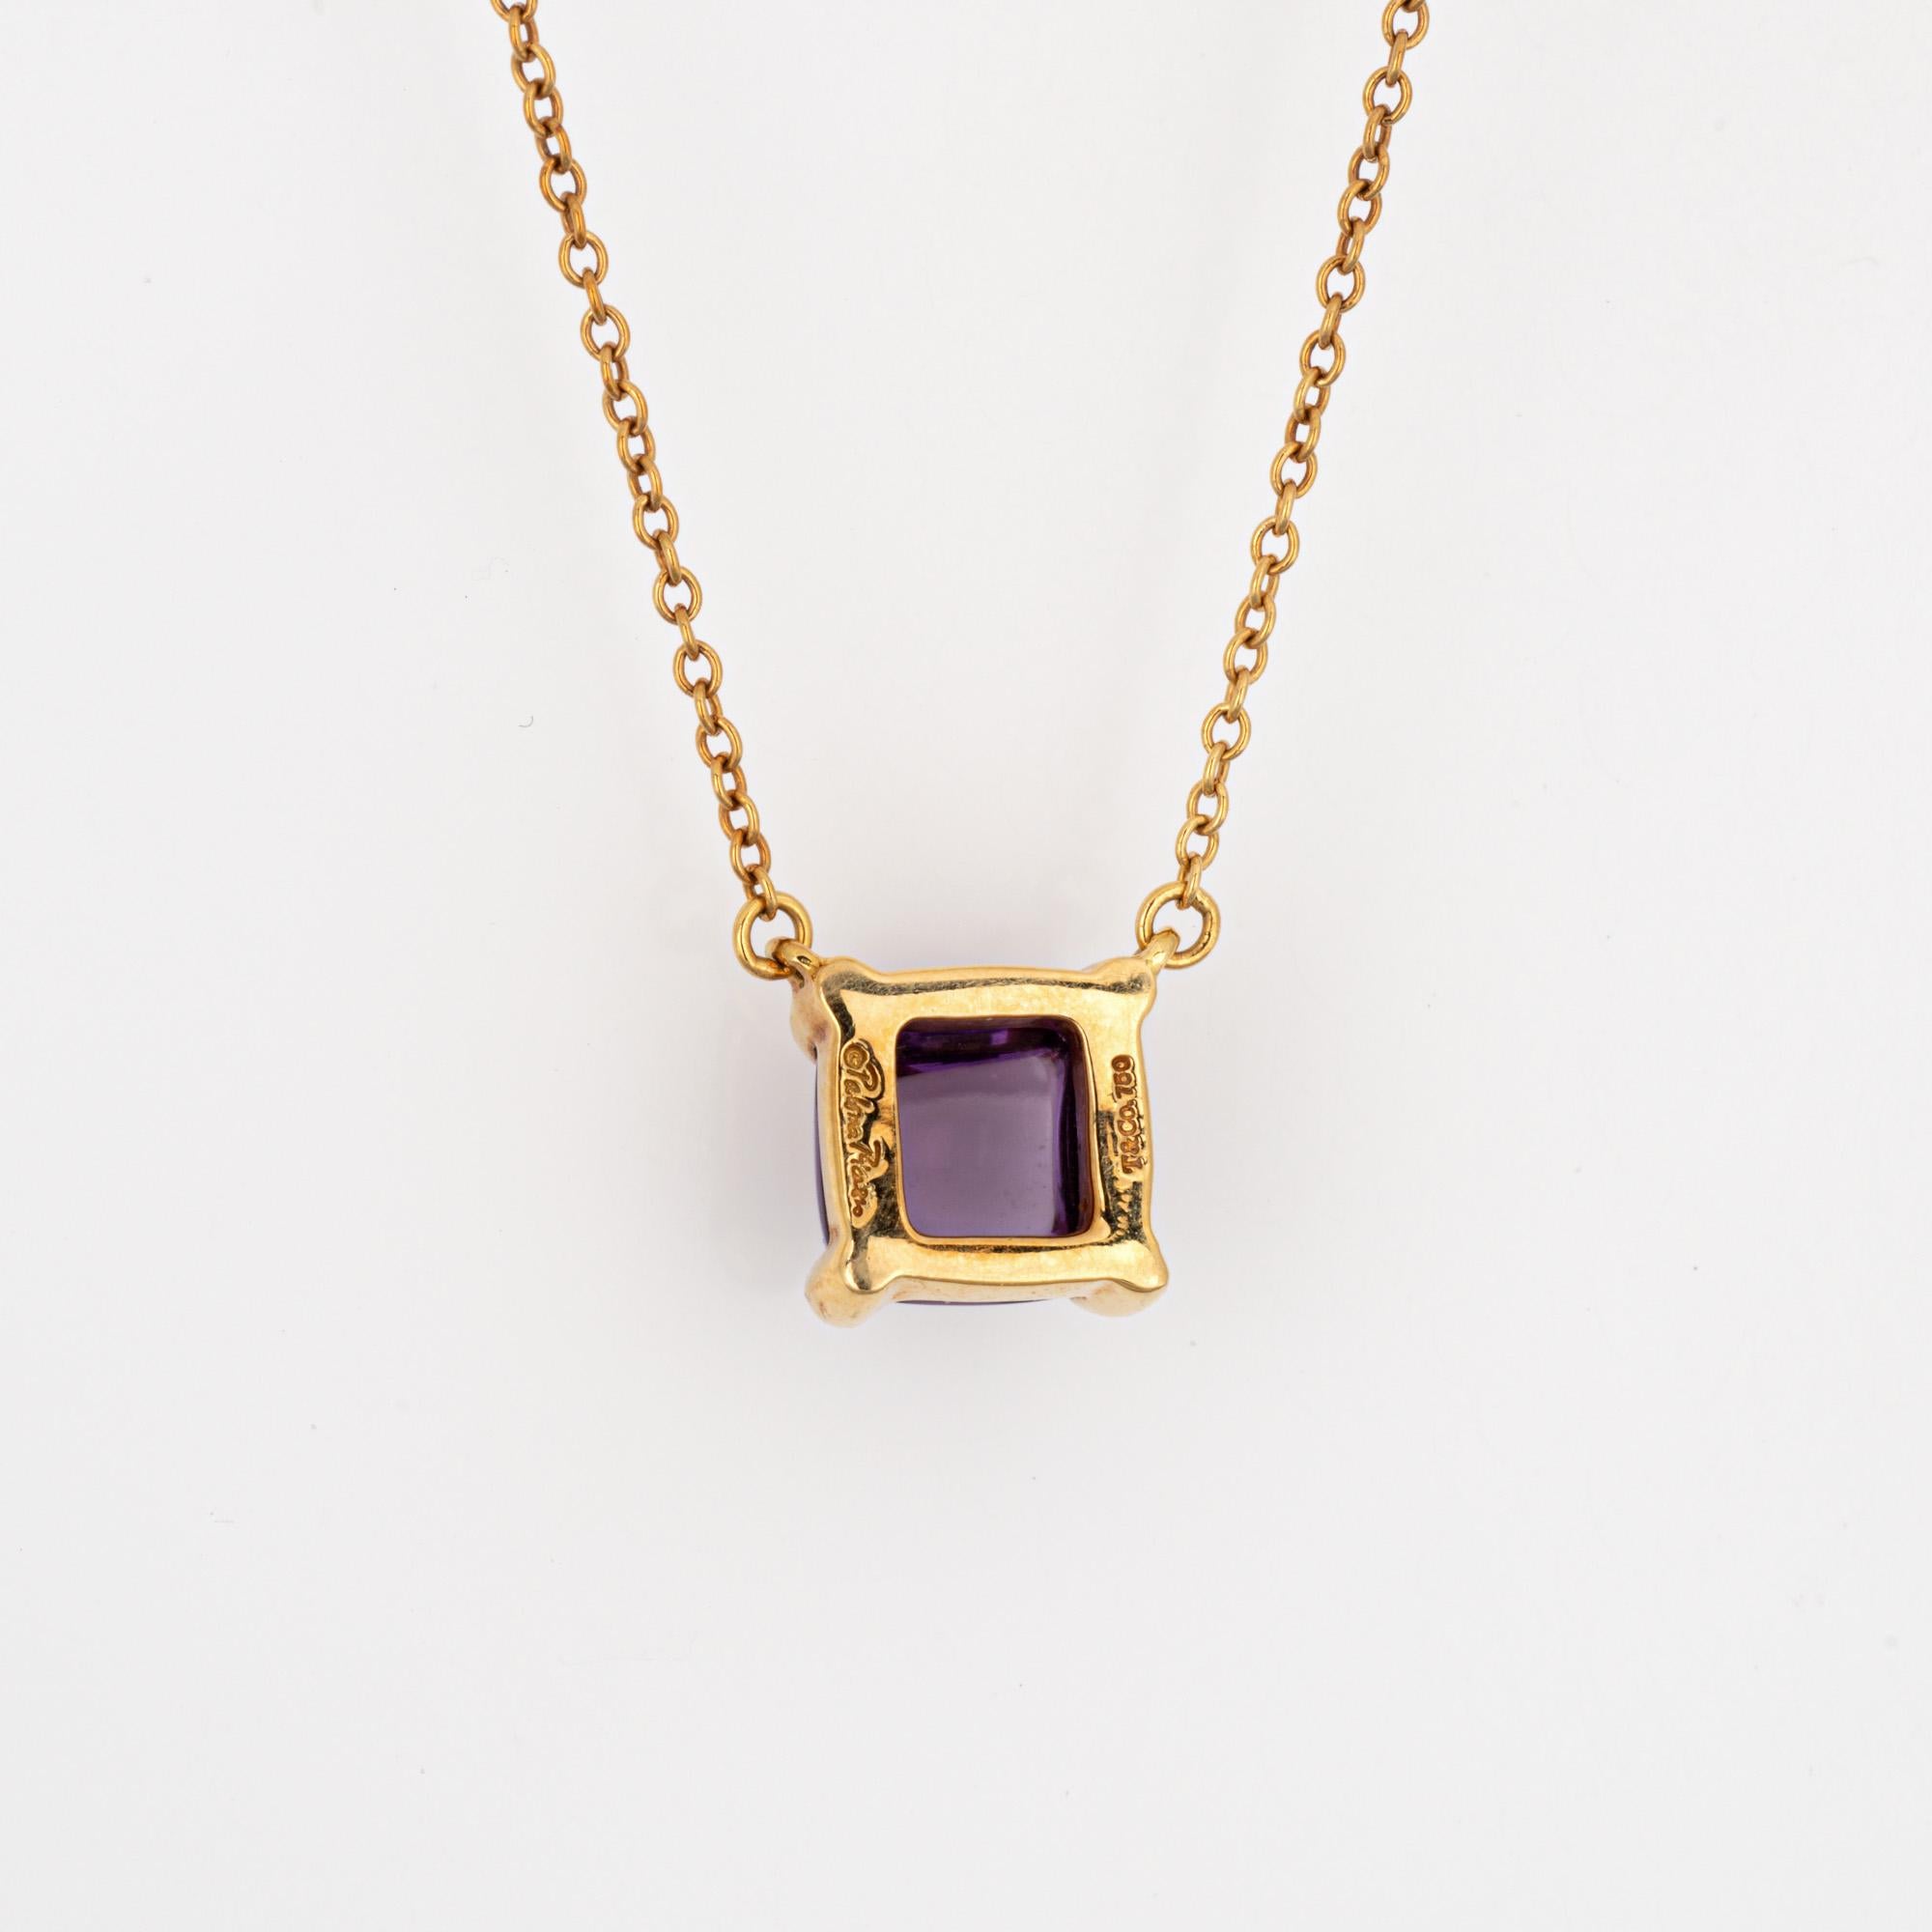 Stylish pre-owned Tiffany & Co Paloma Picasso 'Sugar Stack' amethyst necklace crafted in 18 karat yellow gold.  

The cabochon cut amethyst measures 7mm diameter. The amethyst is in very good condition and free of cracks or chips.
From the Paloma